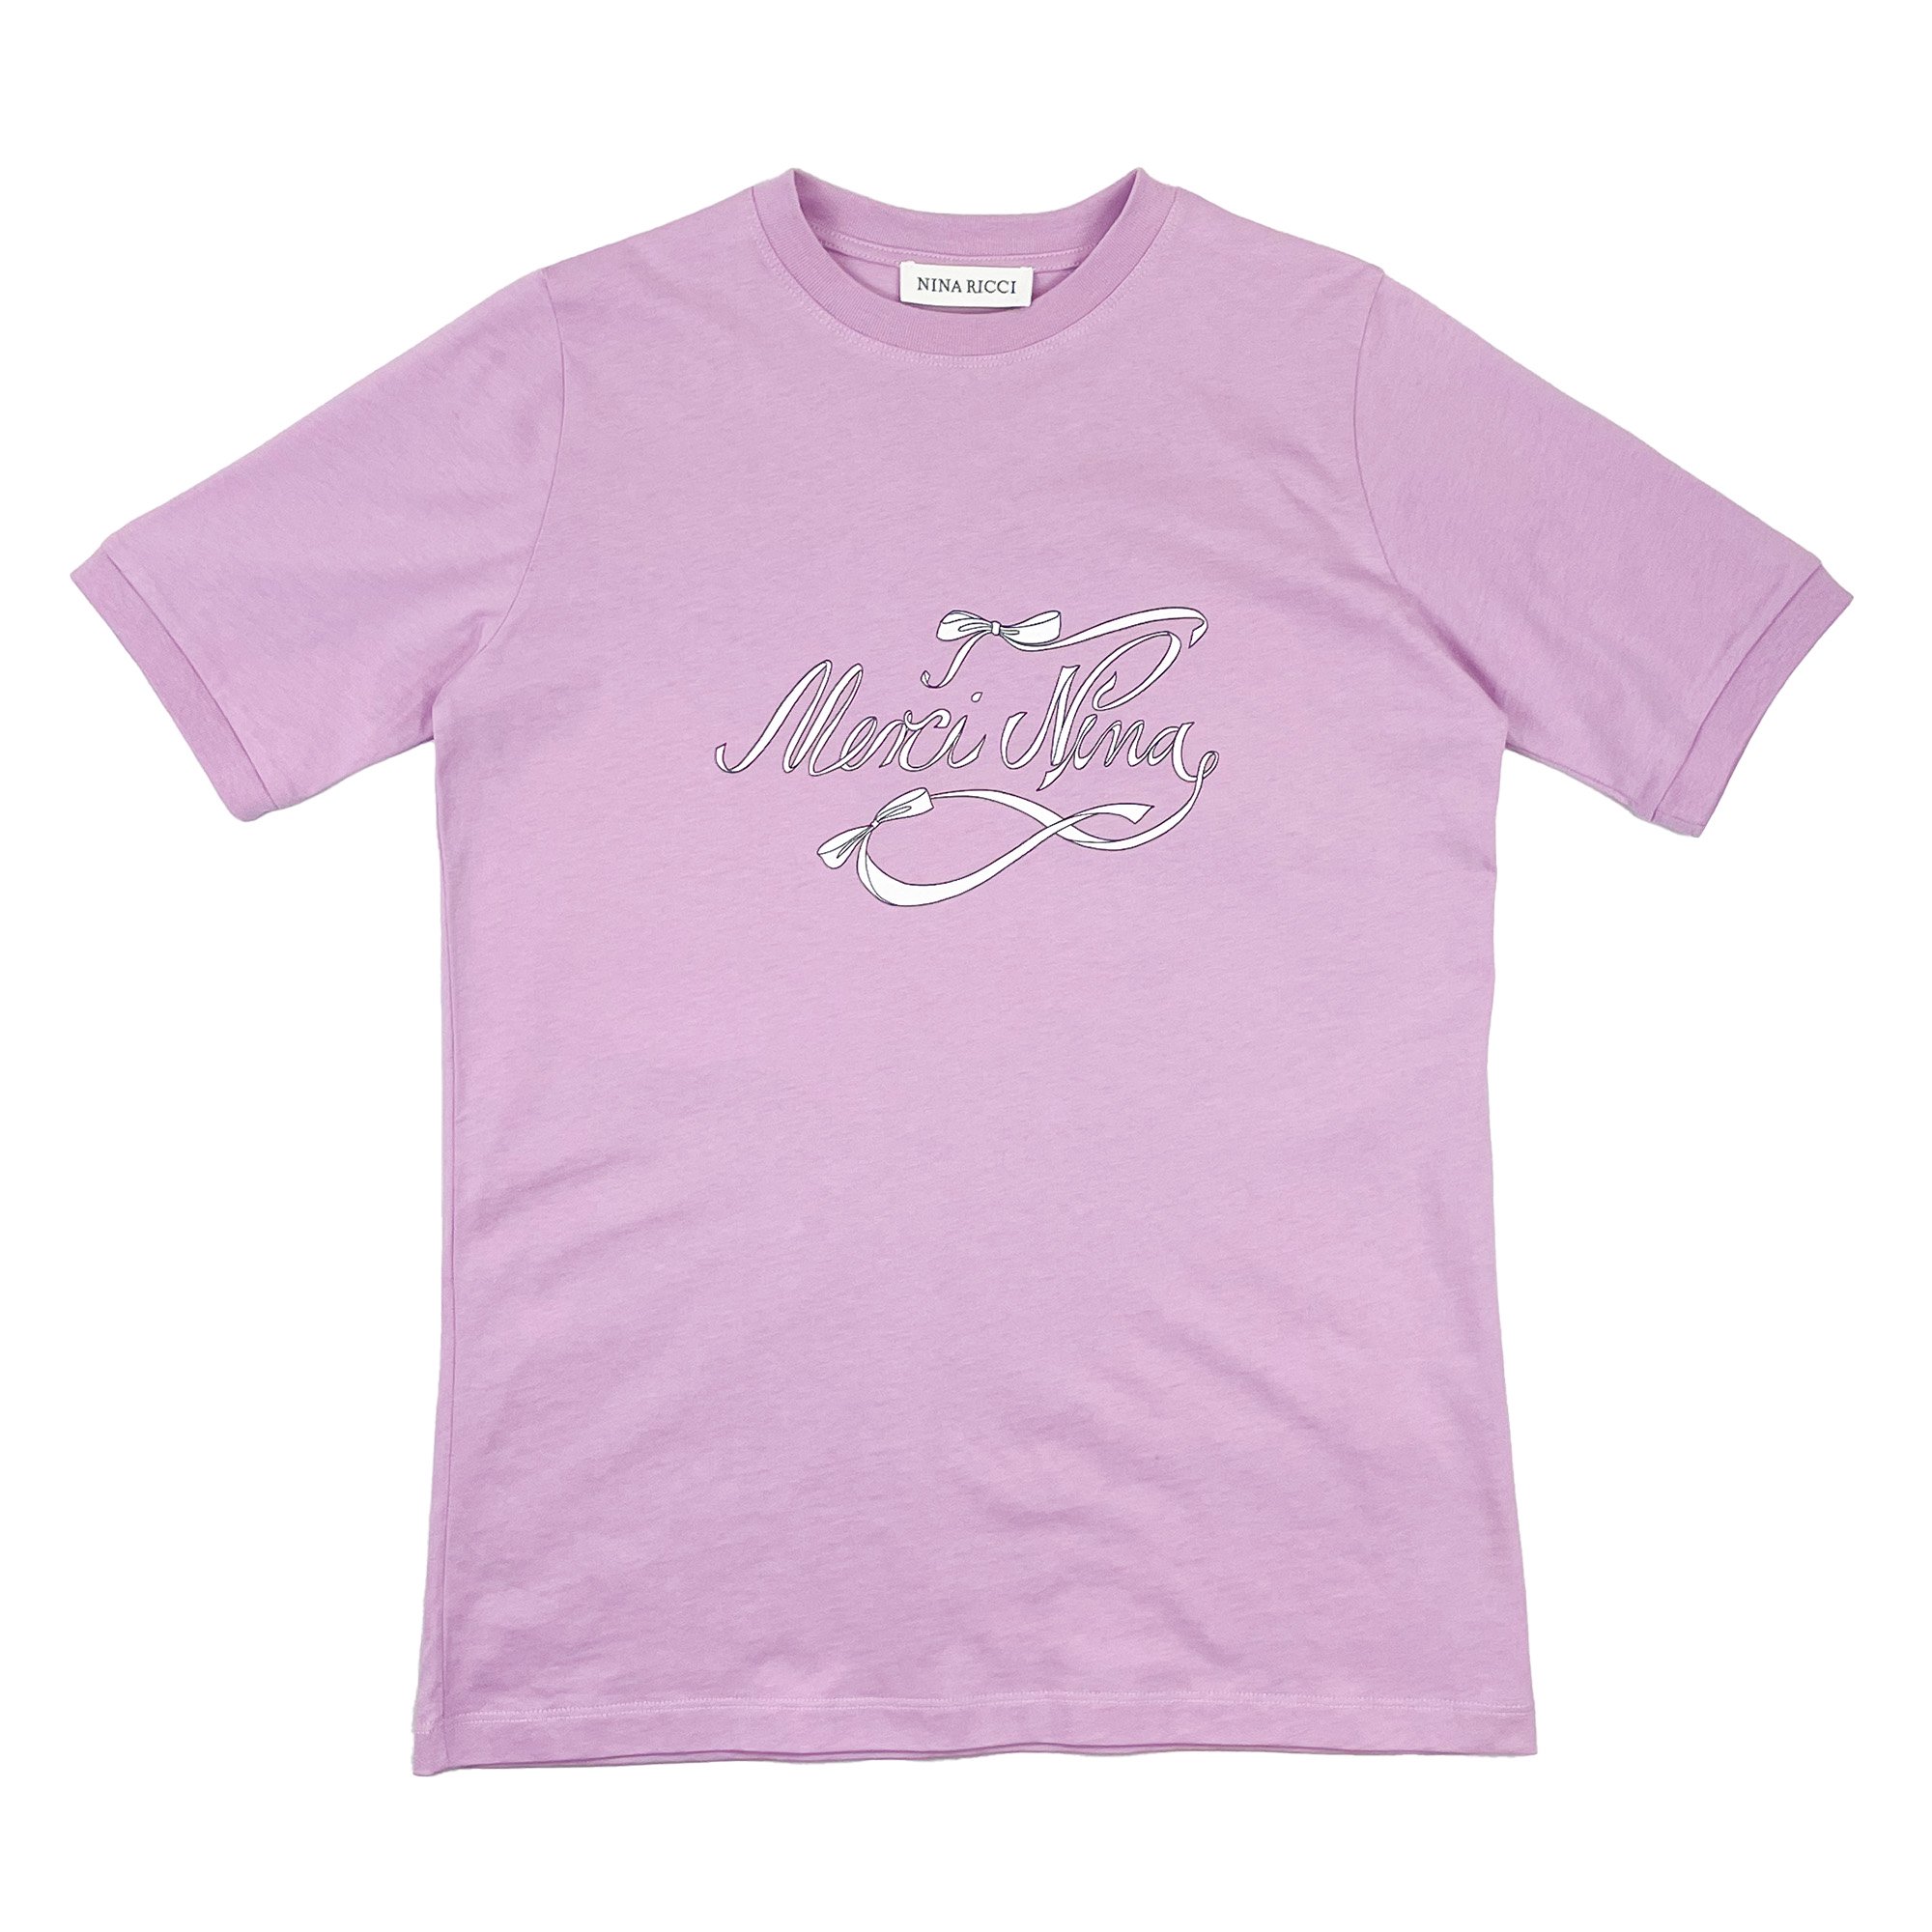 <img class='new_mark_img1' src='https://img.shop-pro.jp/img/new/icons7.gif' style='border:none;display:inline;margin:0px;padding:0px;width:auto;' />NINARICCI S/S T-SHIRT